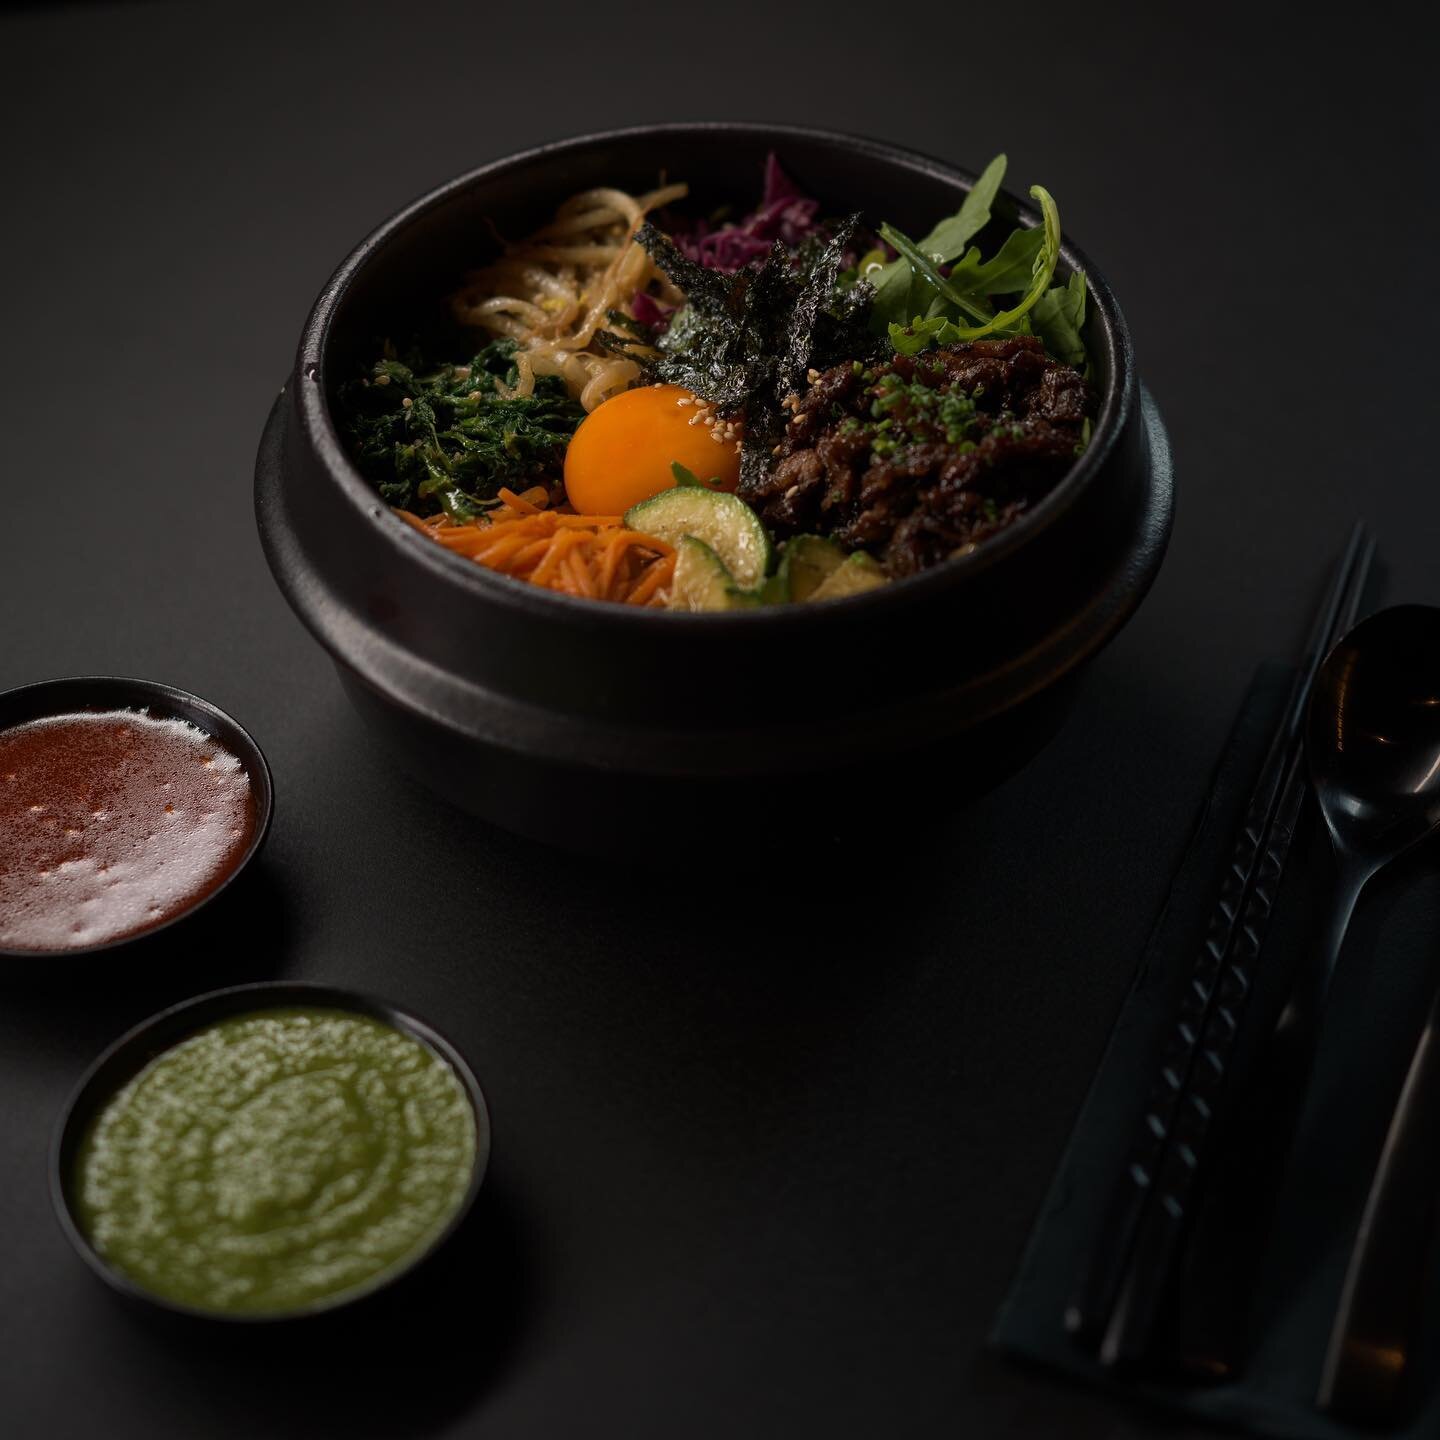 Bibimpark ~ mix it Park Style 

The traditional bibimbap existed even 15 hundred years BC.

Our interpretation :
mix in fresh ingredients and some homemade fermented sauce .

Only Available during lunchtime -
12:00-14:30 pm 

#harmony #tastetherainbo